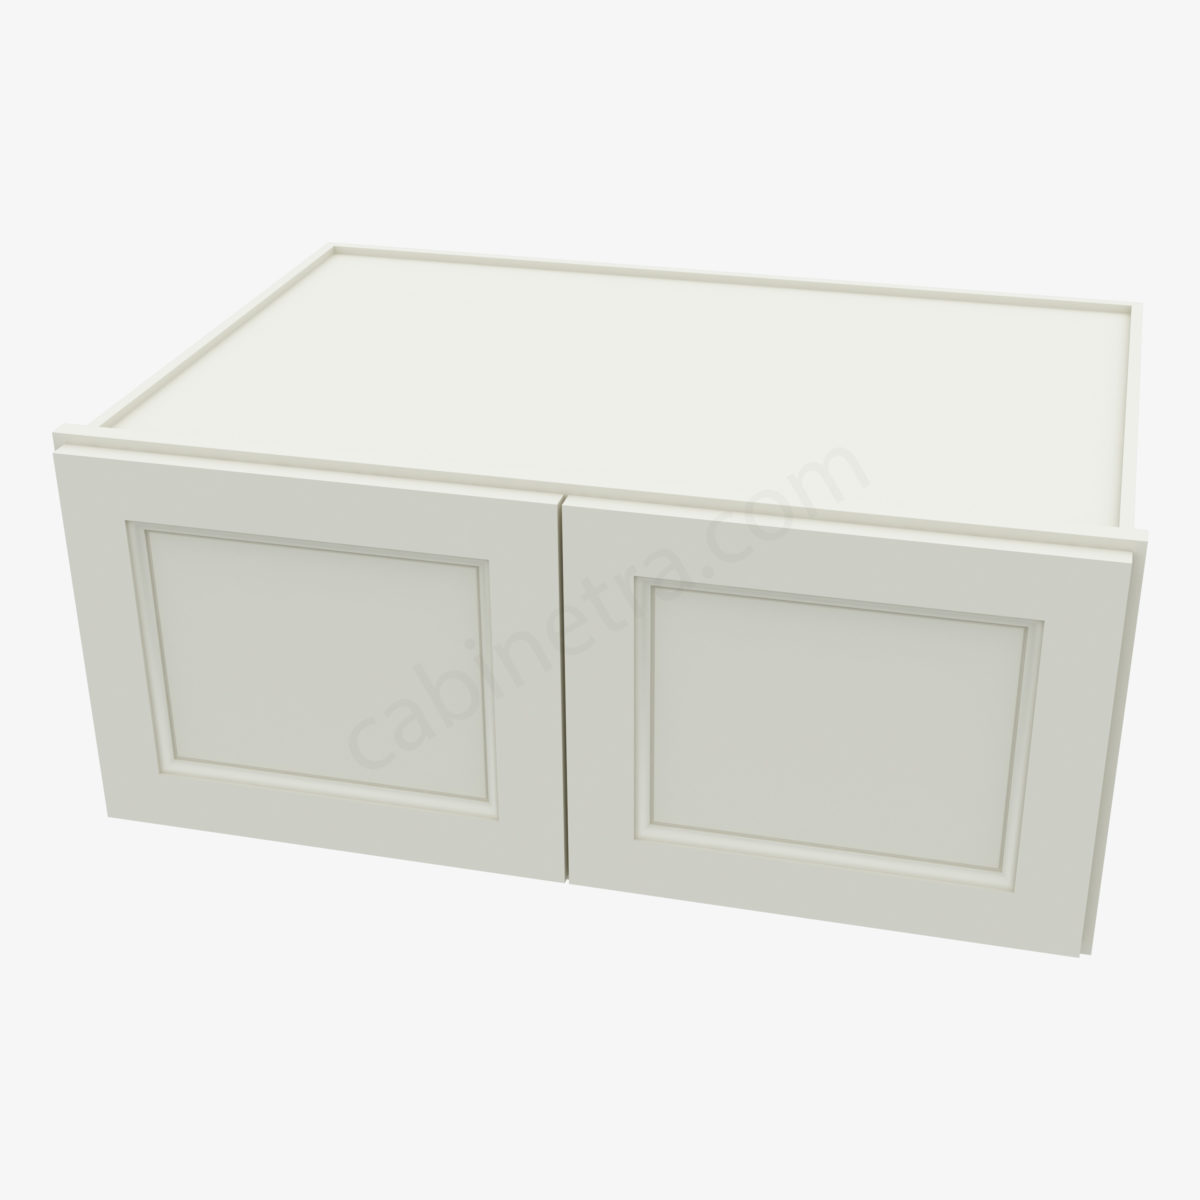 TQ W361524B 3 Forevermark Townplace Crema Cabinetra scaled